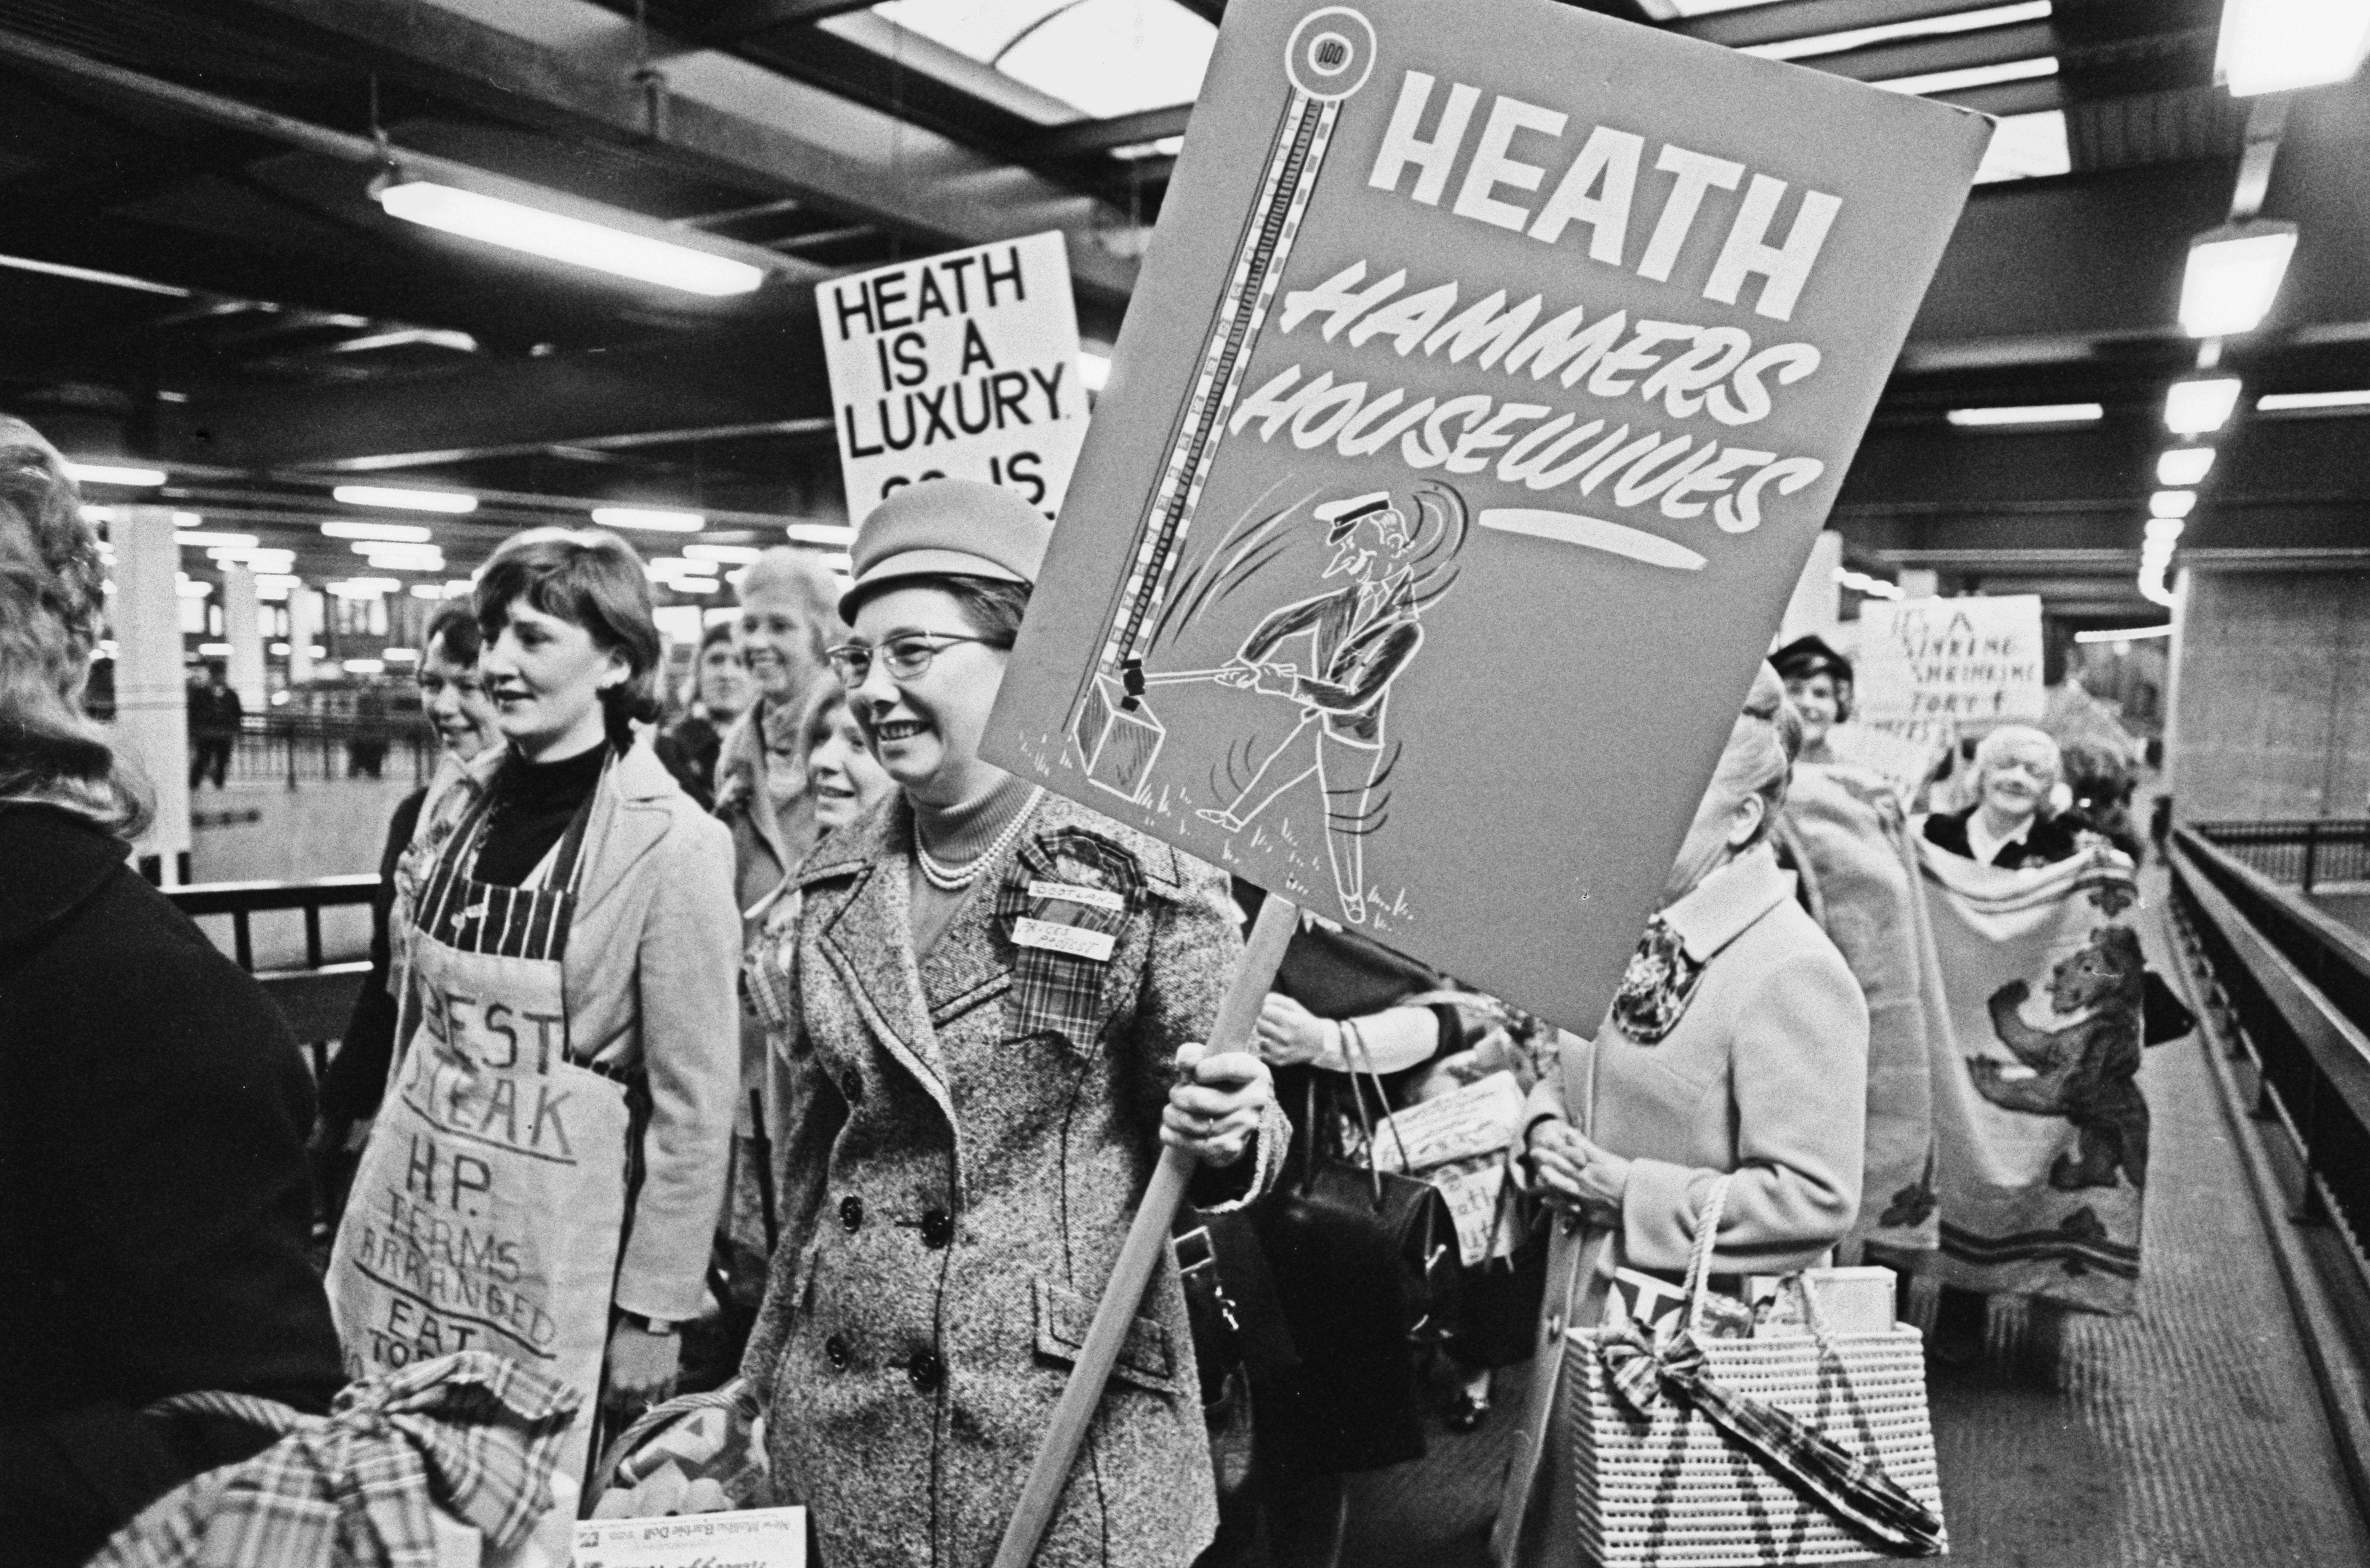 A group of women arrive at Euston Station in London from Scotland to protest against the new inflation rate announced by British Prime Minister Edward Heath, UK, October 17 1973.  (Photo by Evening Standard/Hulton Archive/Getty Images)